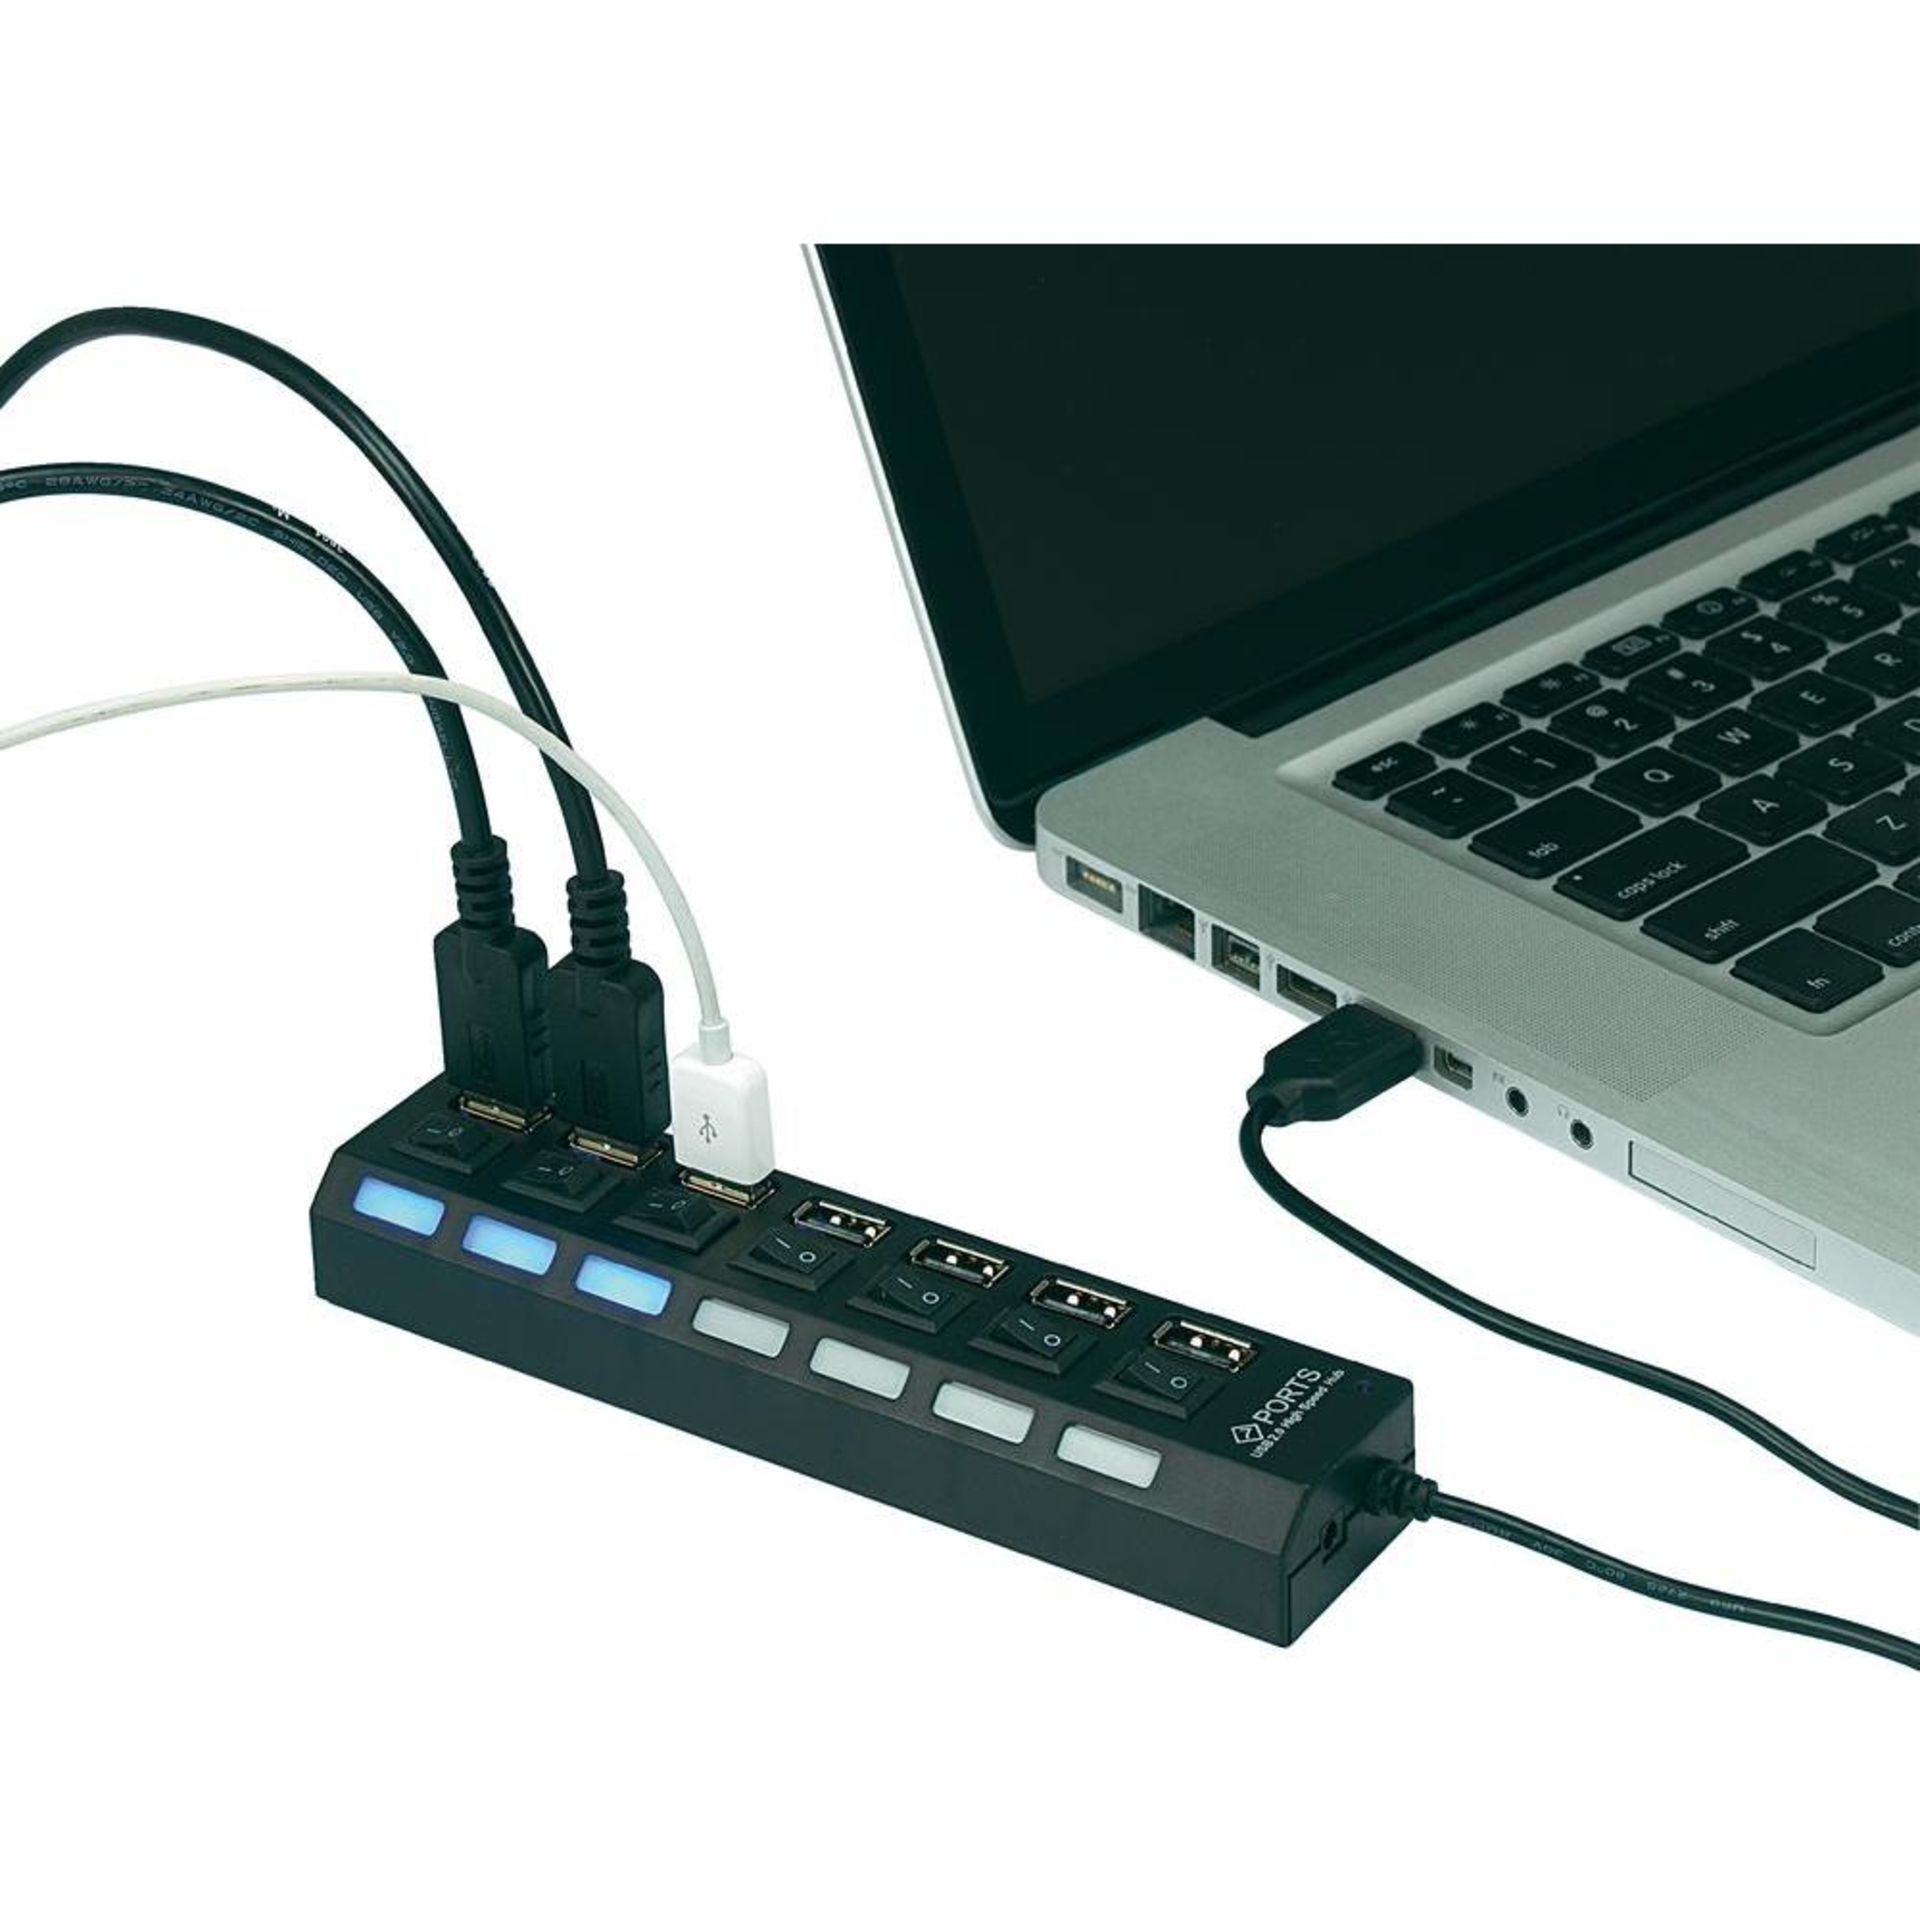 *TRADE QTY* Brand New 7 Port USB High Speed Hub - On/Off Switch on Each Port - With Blue LED - Image 3 of 3